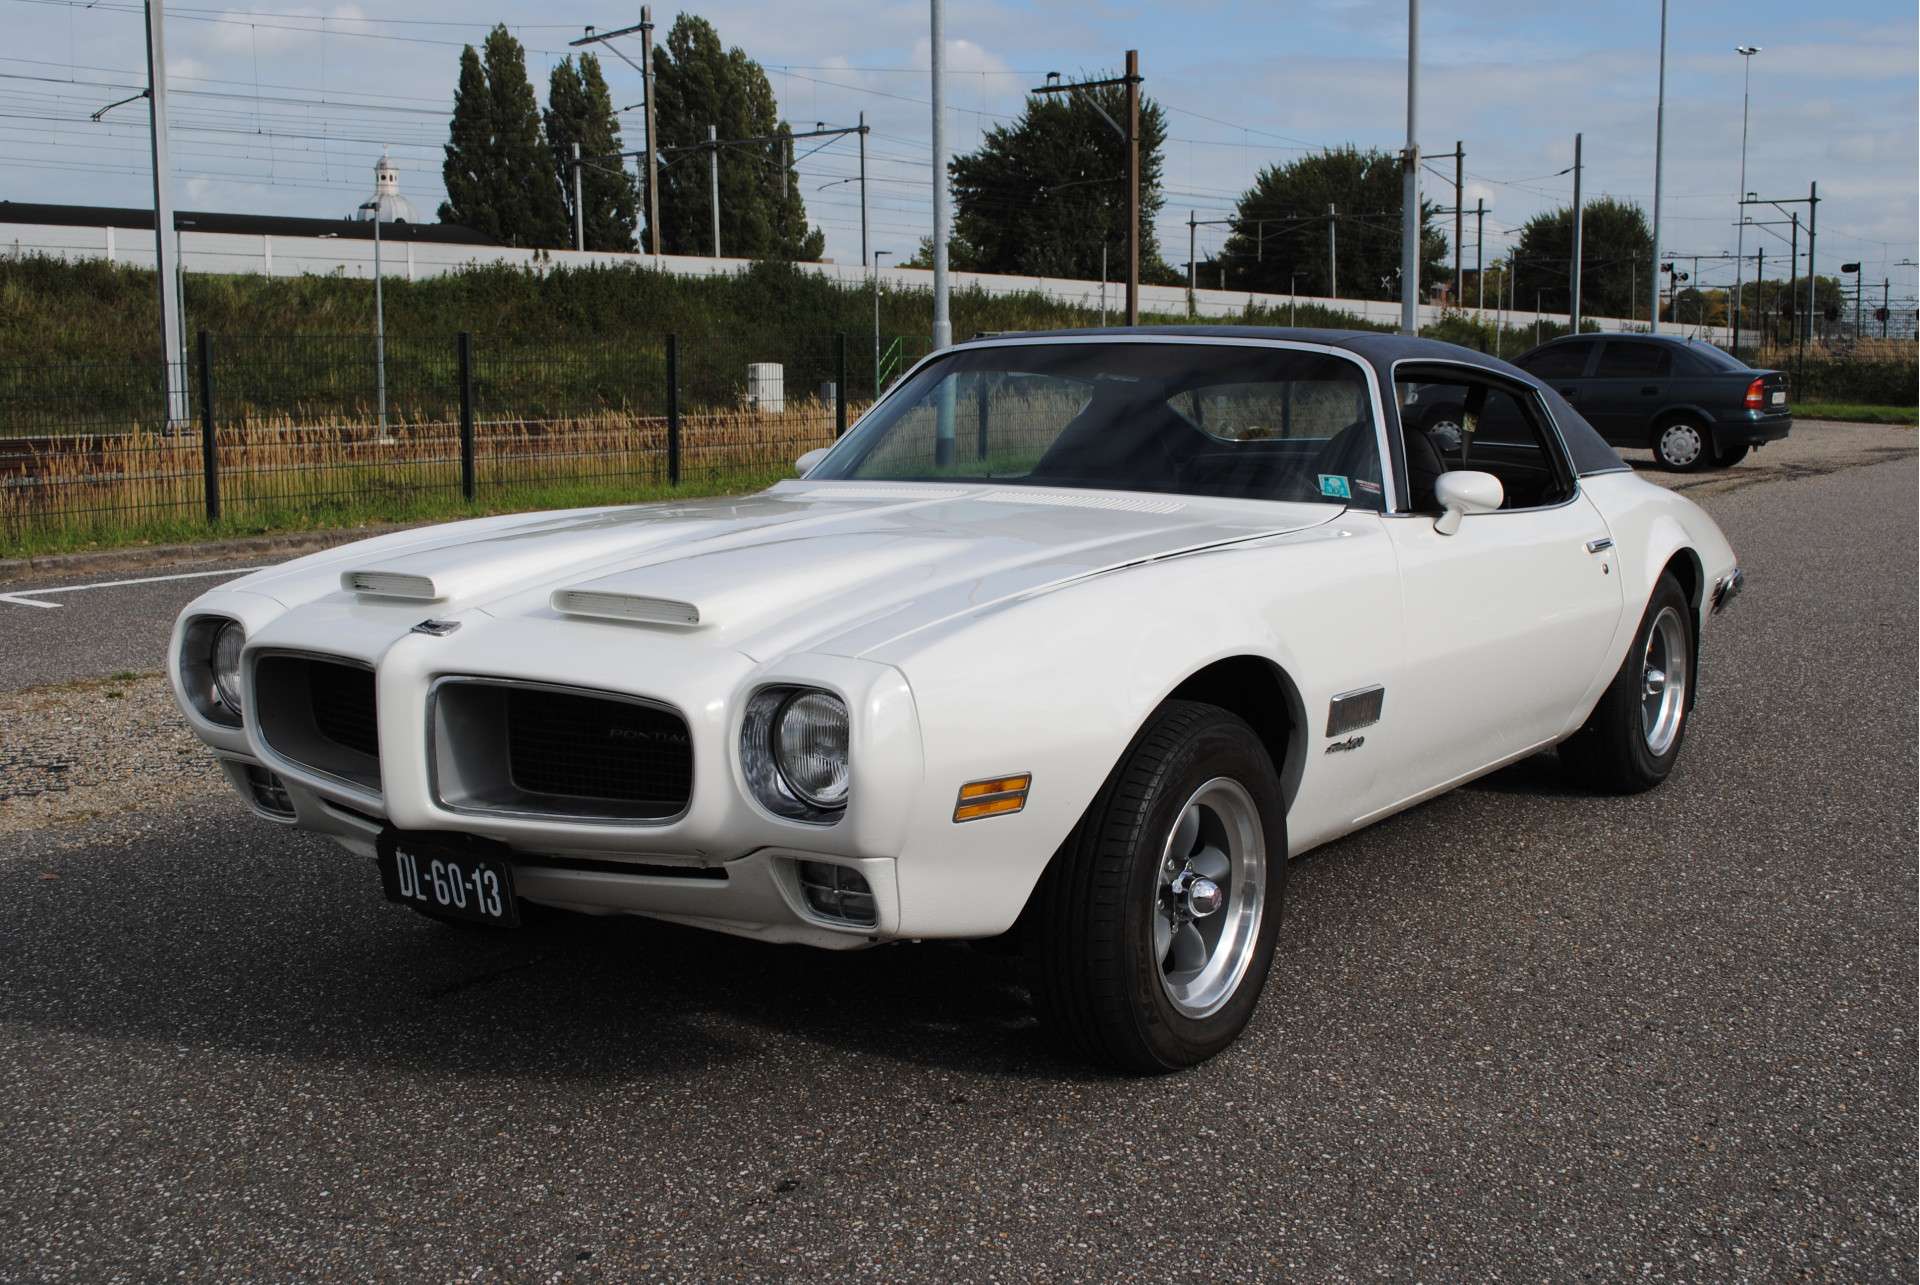 Pontiac Firebird Coupe in White antique / classic in Dordrecht for € 25,000.-